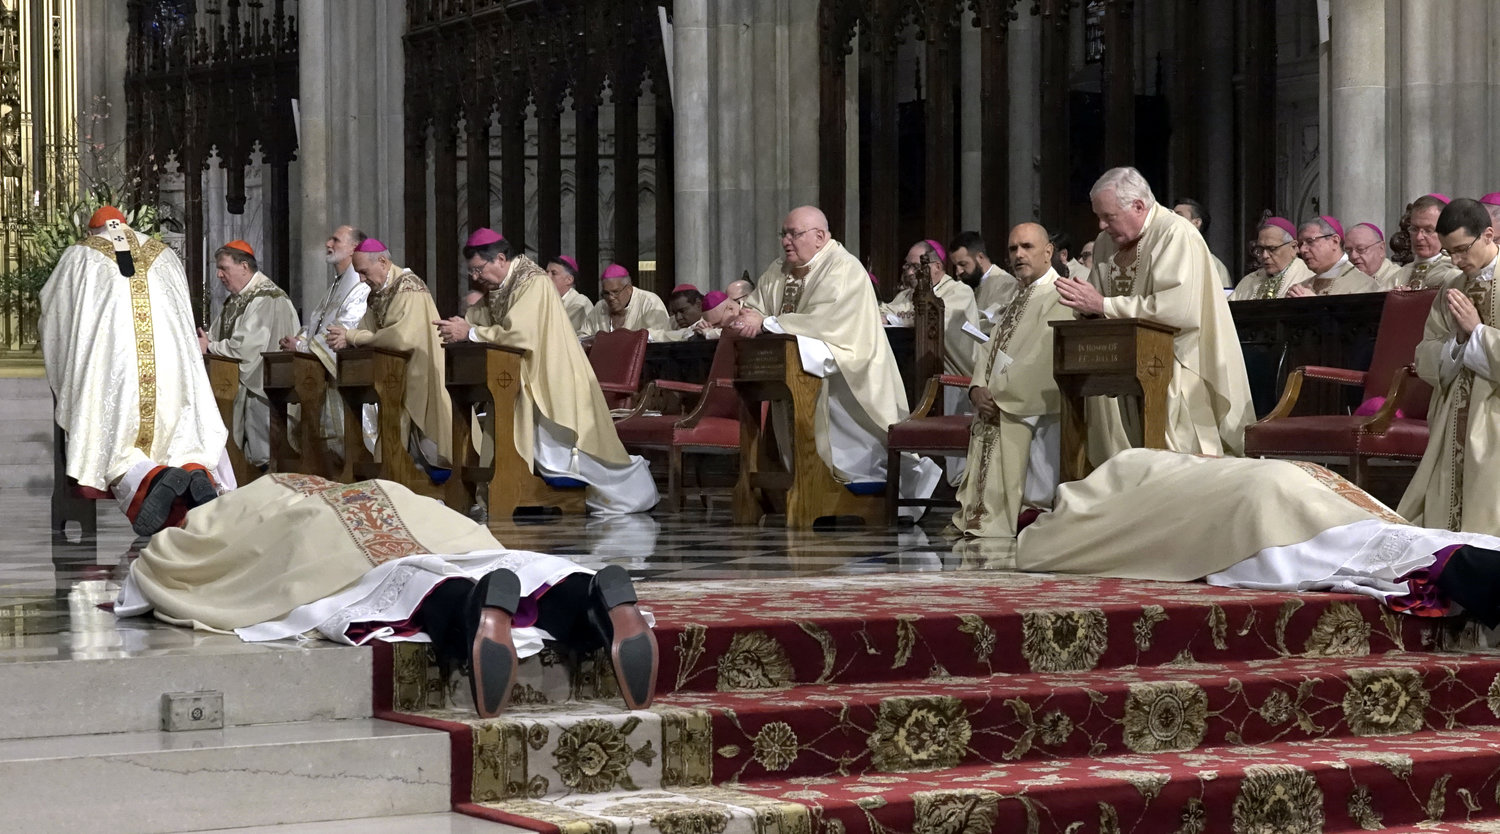 The bishops-elect lay prostrate in the cathedral sanctuary during the ordination rite.